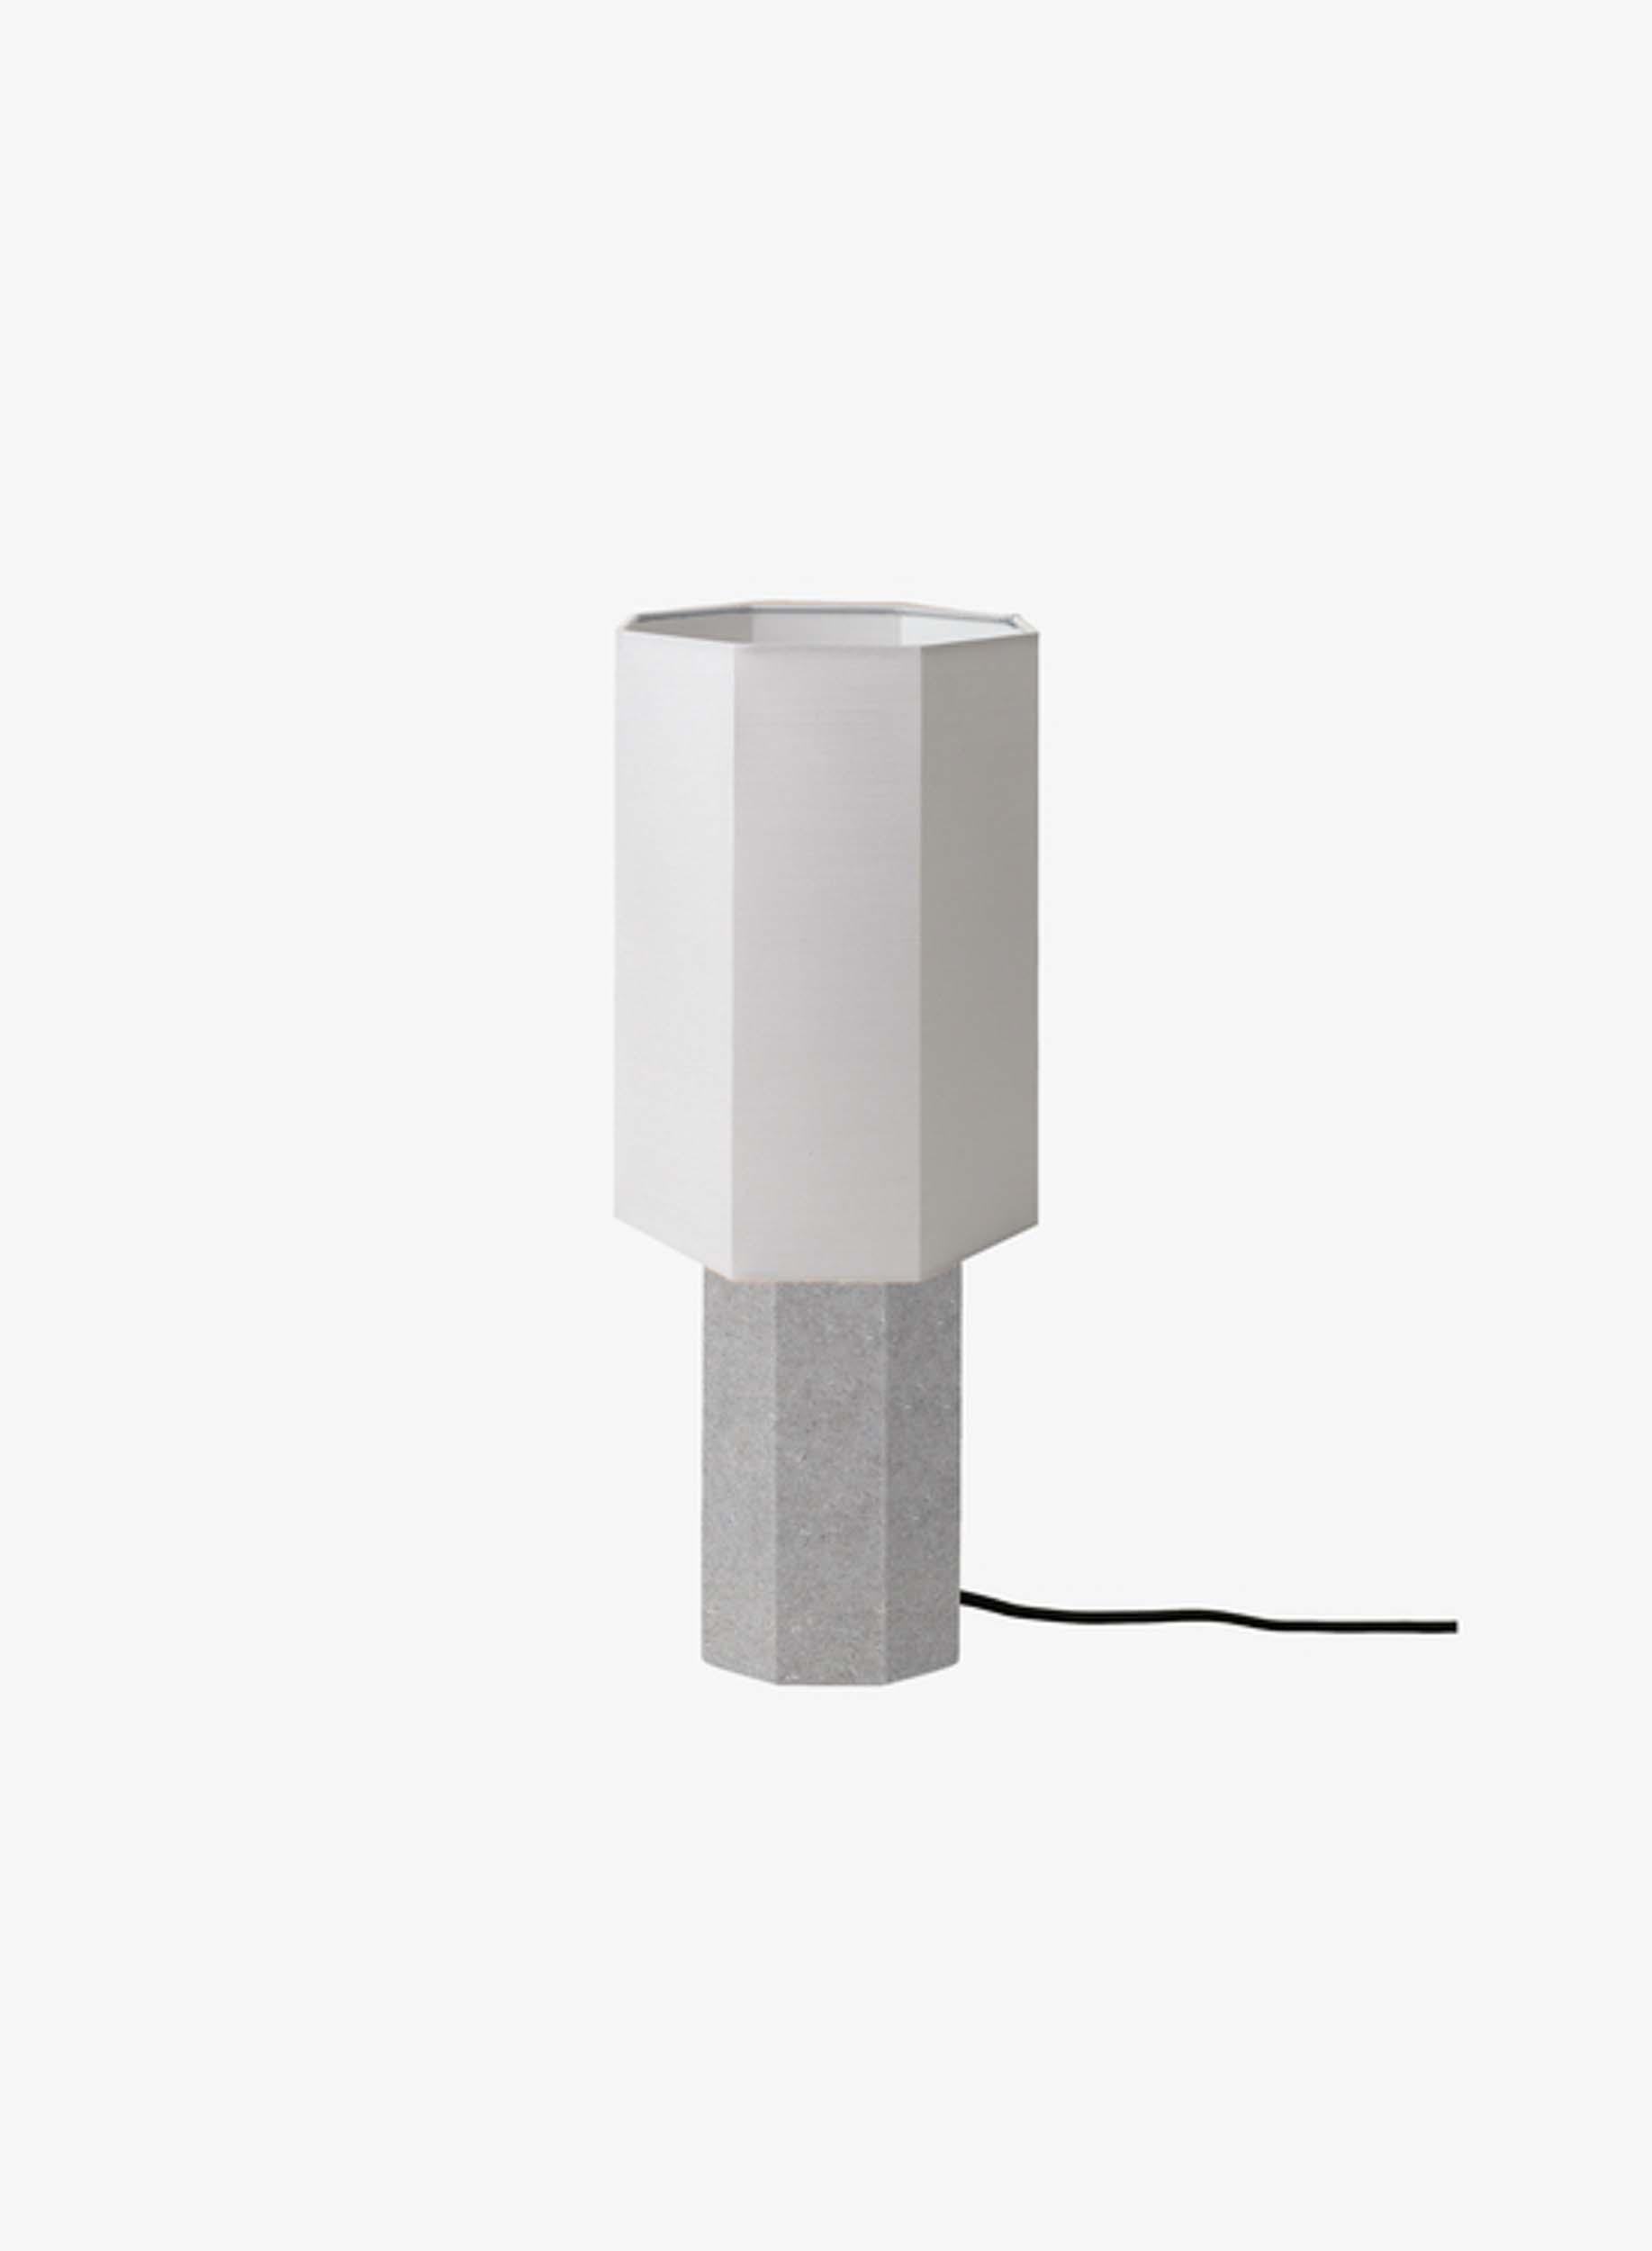 Table lamp 'The Eight over Eight' by Louise Roe 

Designed in Denmark and manufactured in Italy.

Model shown in the picture: 
Base: Grey marble
Lampshade: Light grey 

Dimensions : 
Height: 36 cm
Diameter: 12.5 cm

Louise Roe is a